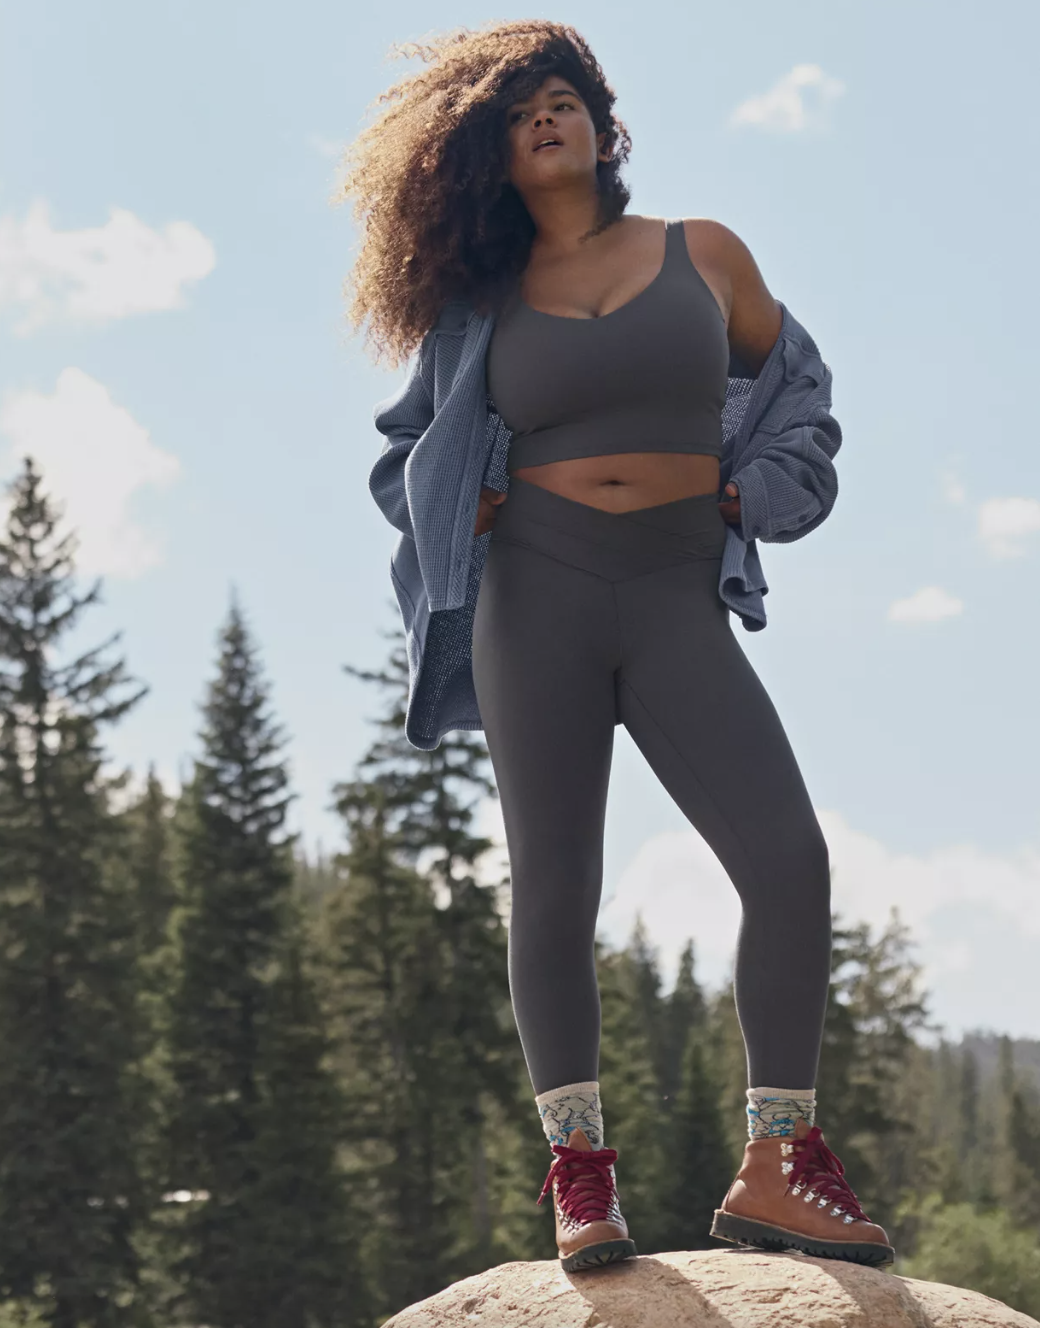 A model in the crossover waist leggings in gray